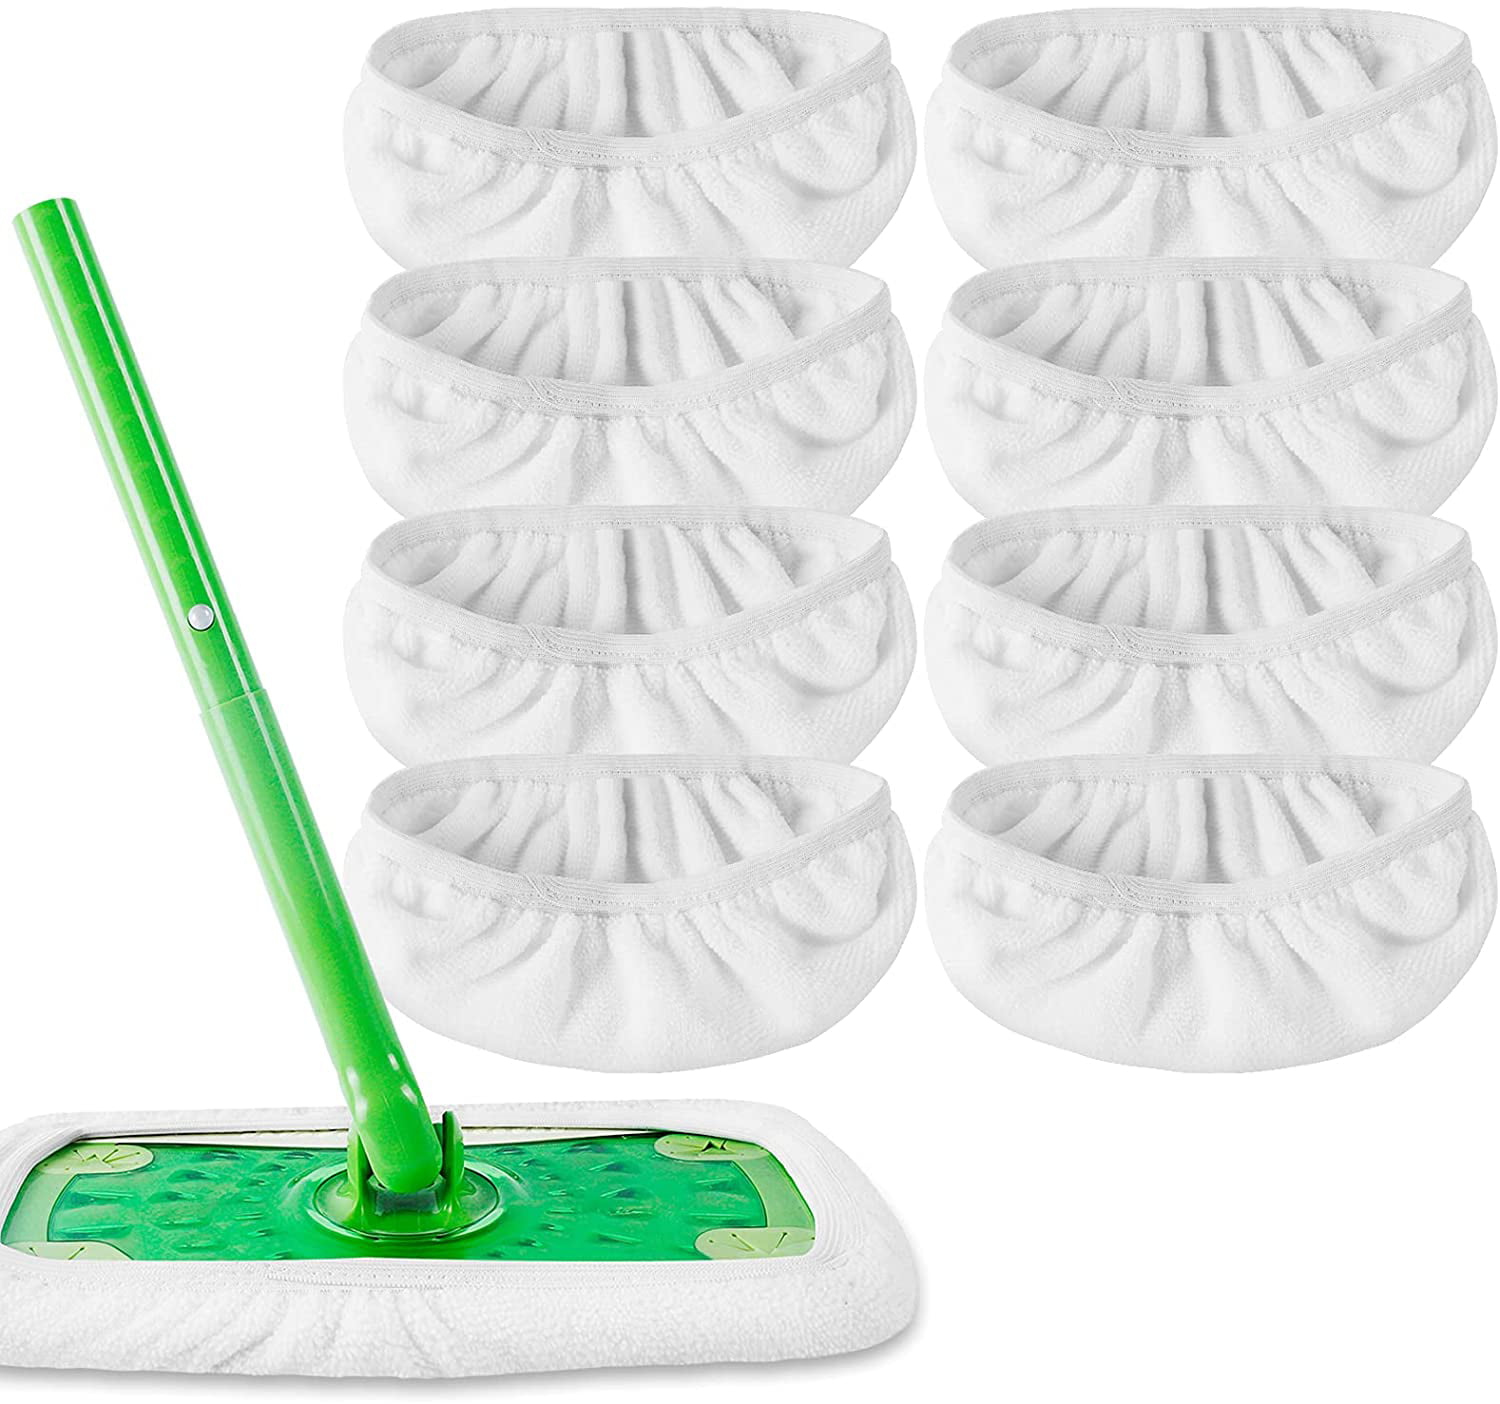 KEEPOW Reusable Mop Pads Compatible with Swiffer Sweeper Mop 8 Pack White Mop is Not Included Washable Mop Refills for Wet and Dry Use 